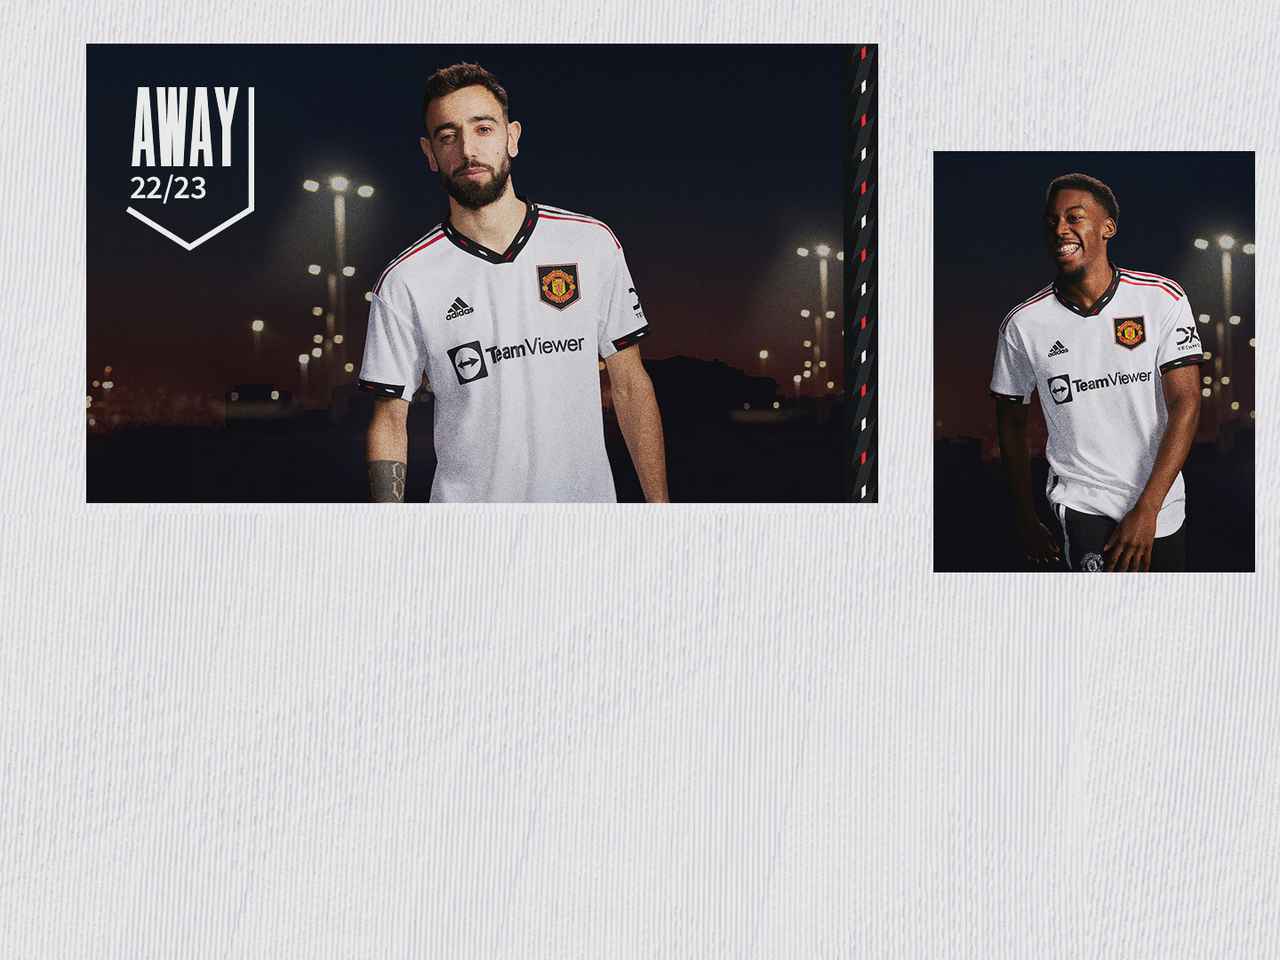 Manchester United release new away kit - BBC Sport